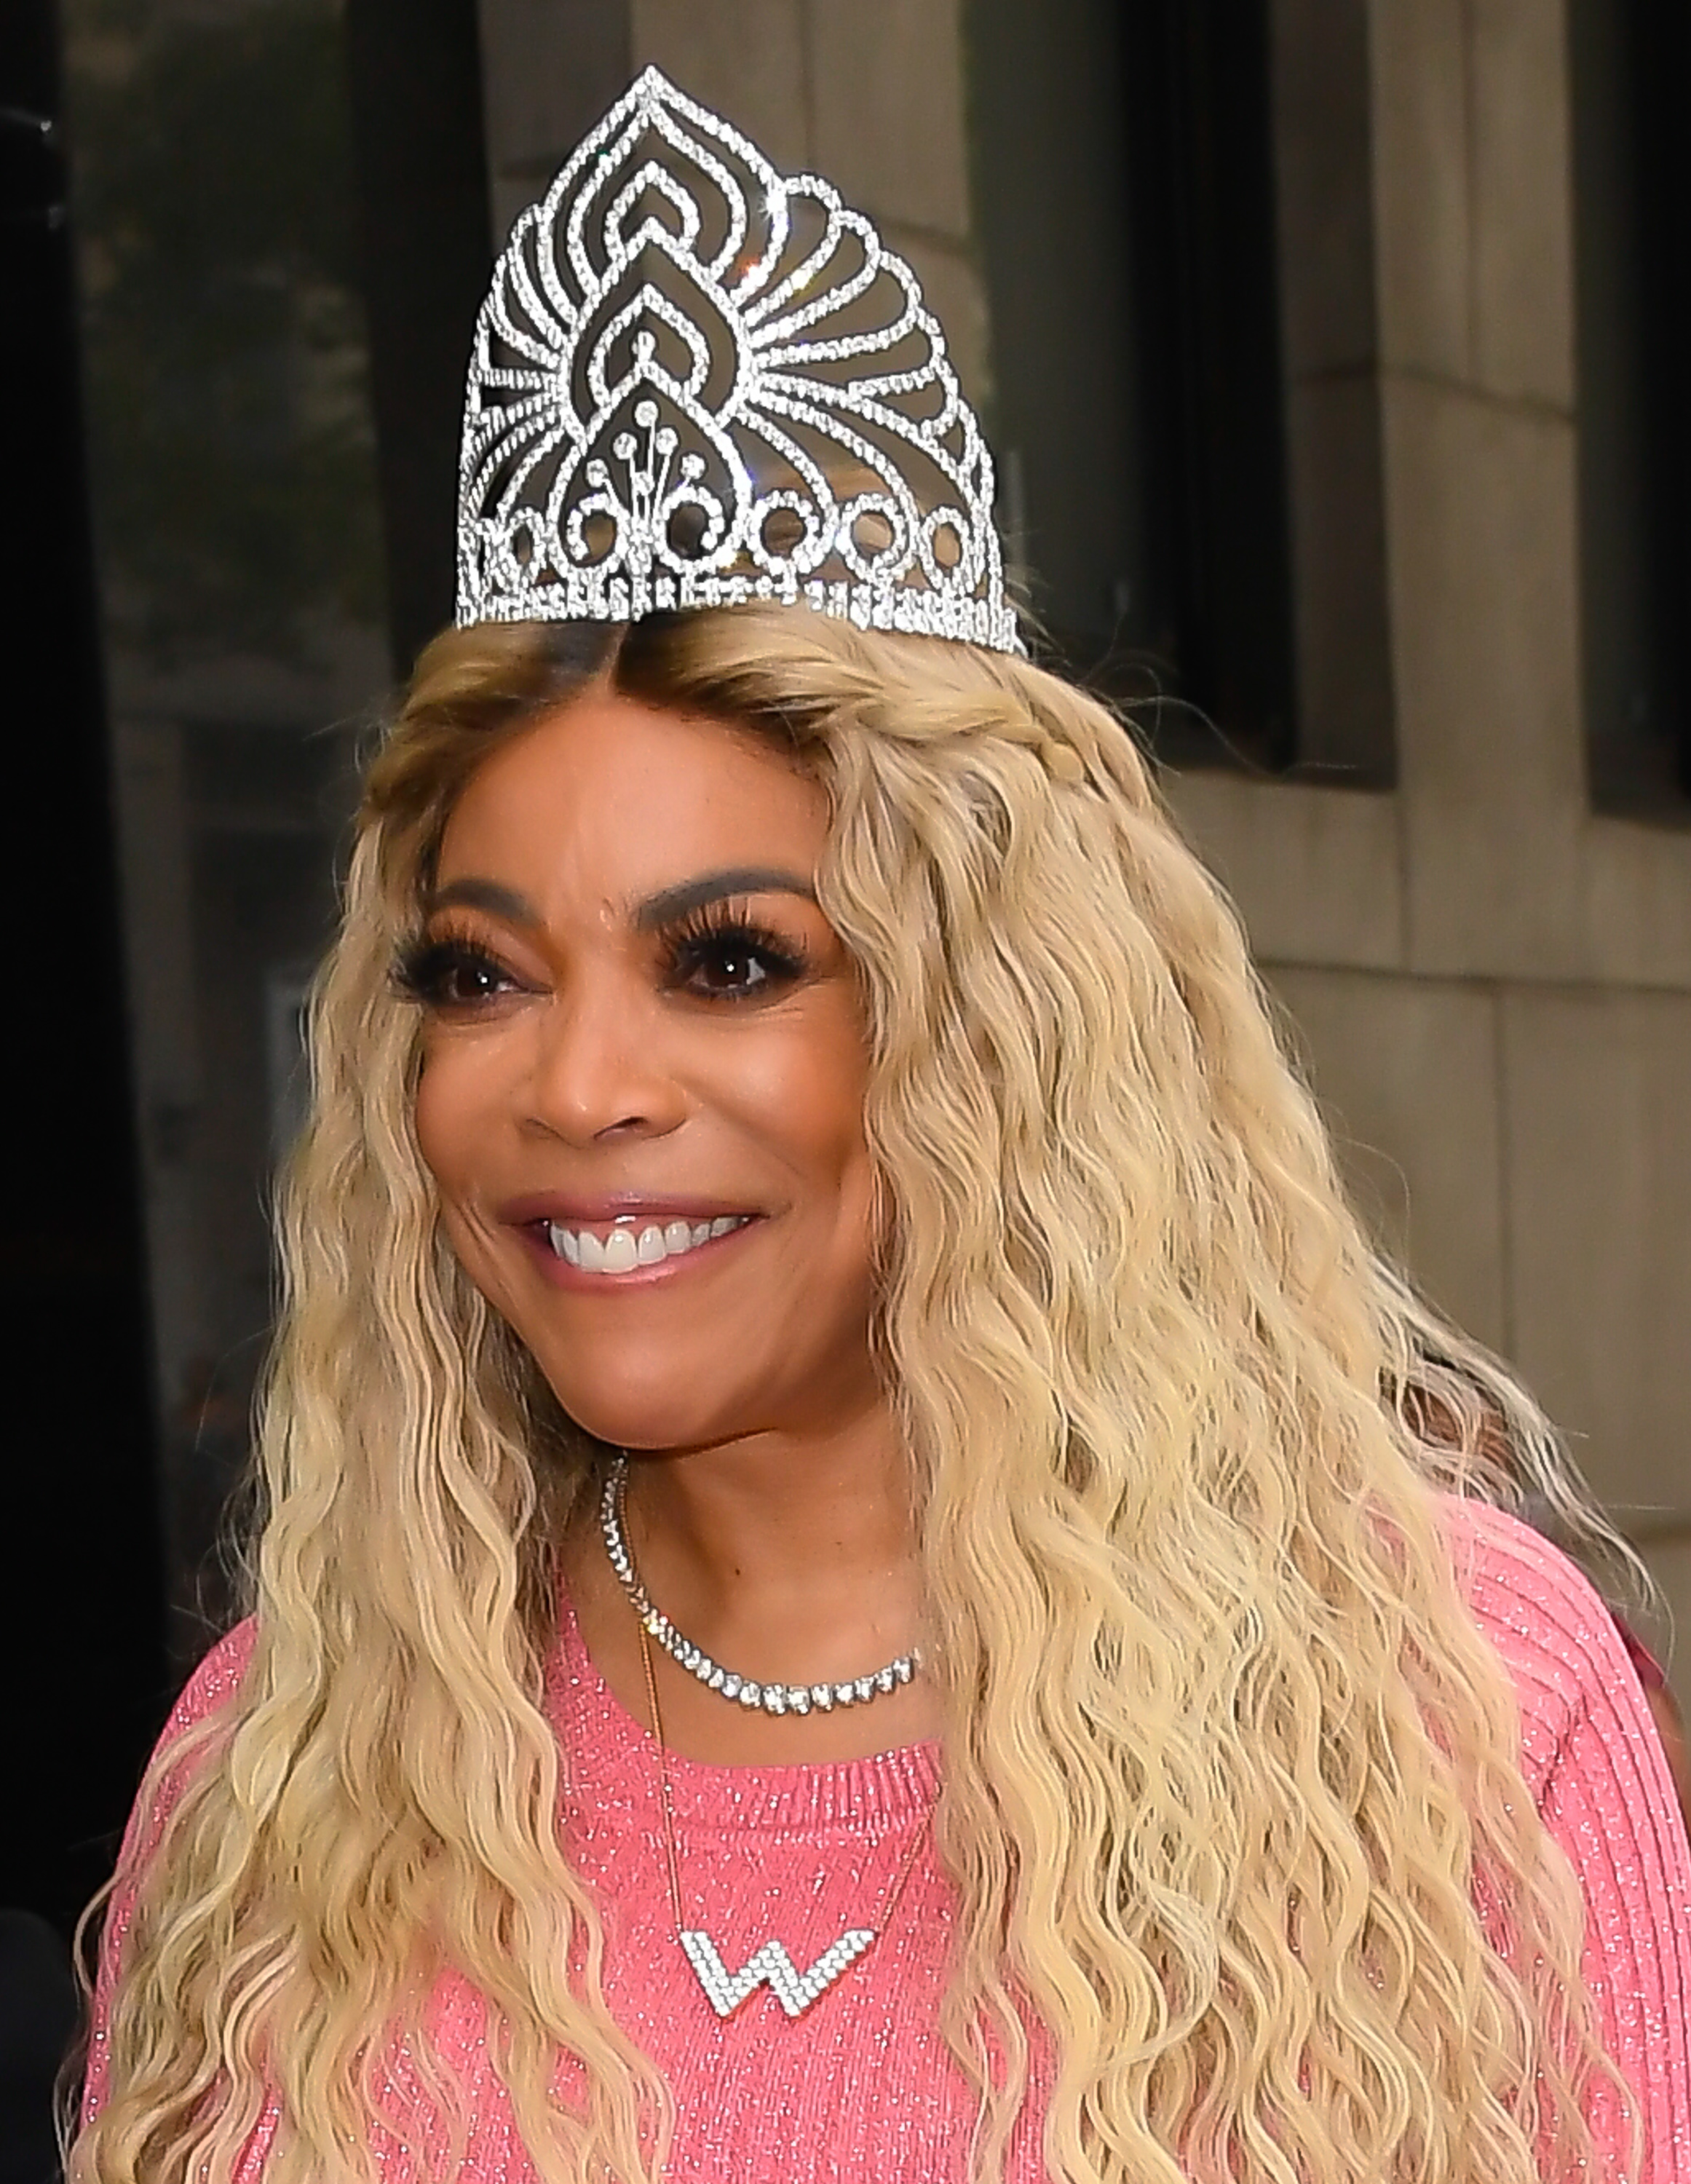 Wendy Williams seen outside "The Wendy Williams Show" studio on July 17, 2019 in New York City. | Source: Getty Images